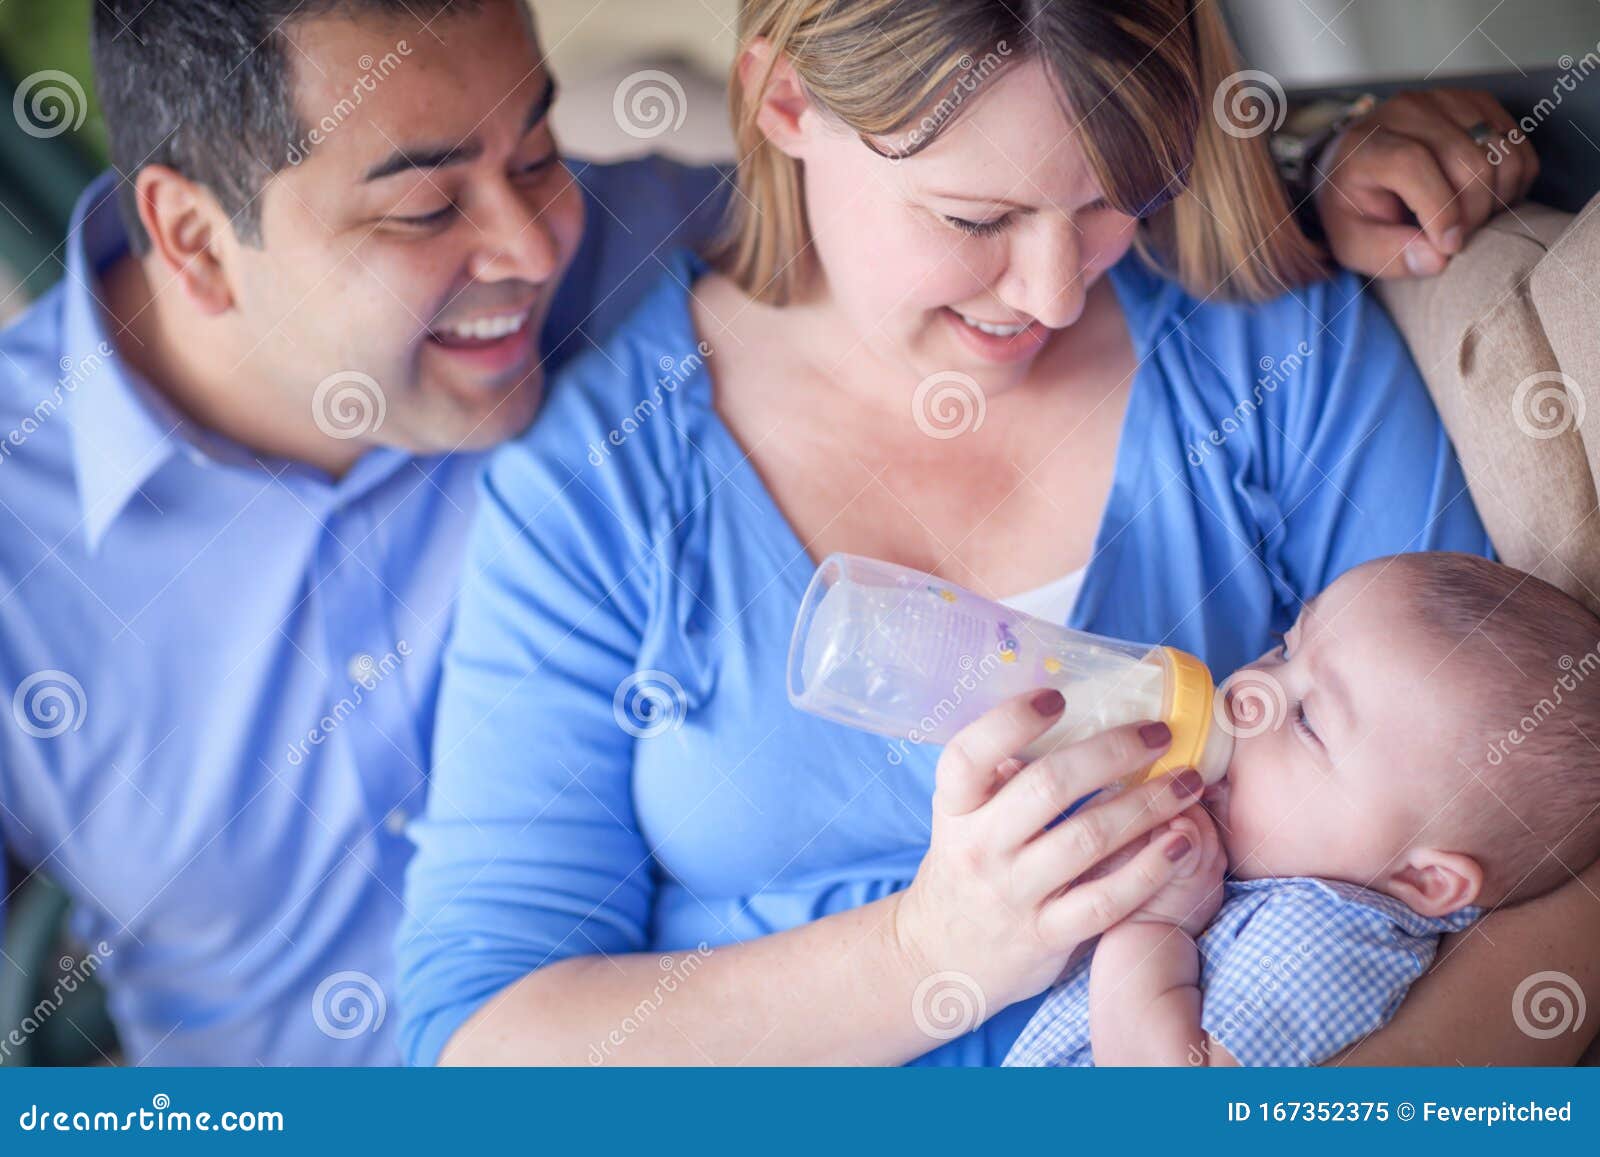 happy attractive mixed race couple bottle feeding their baby